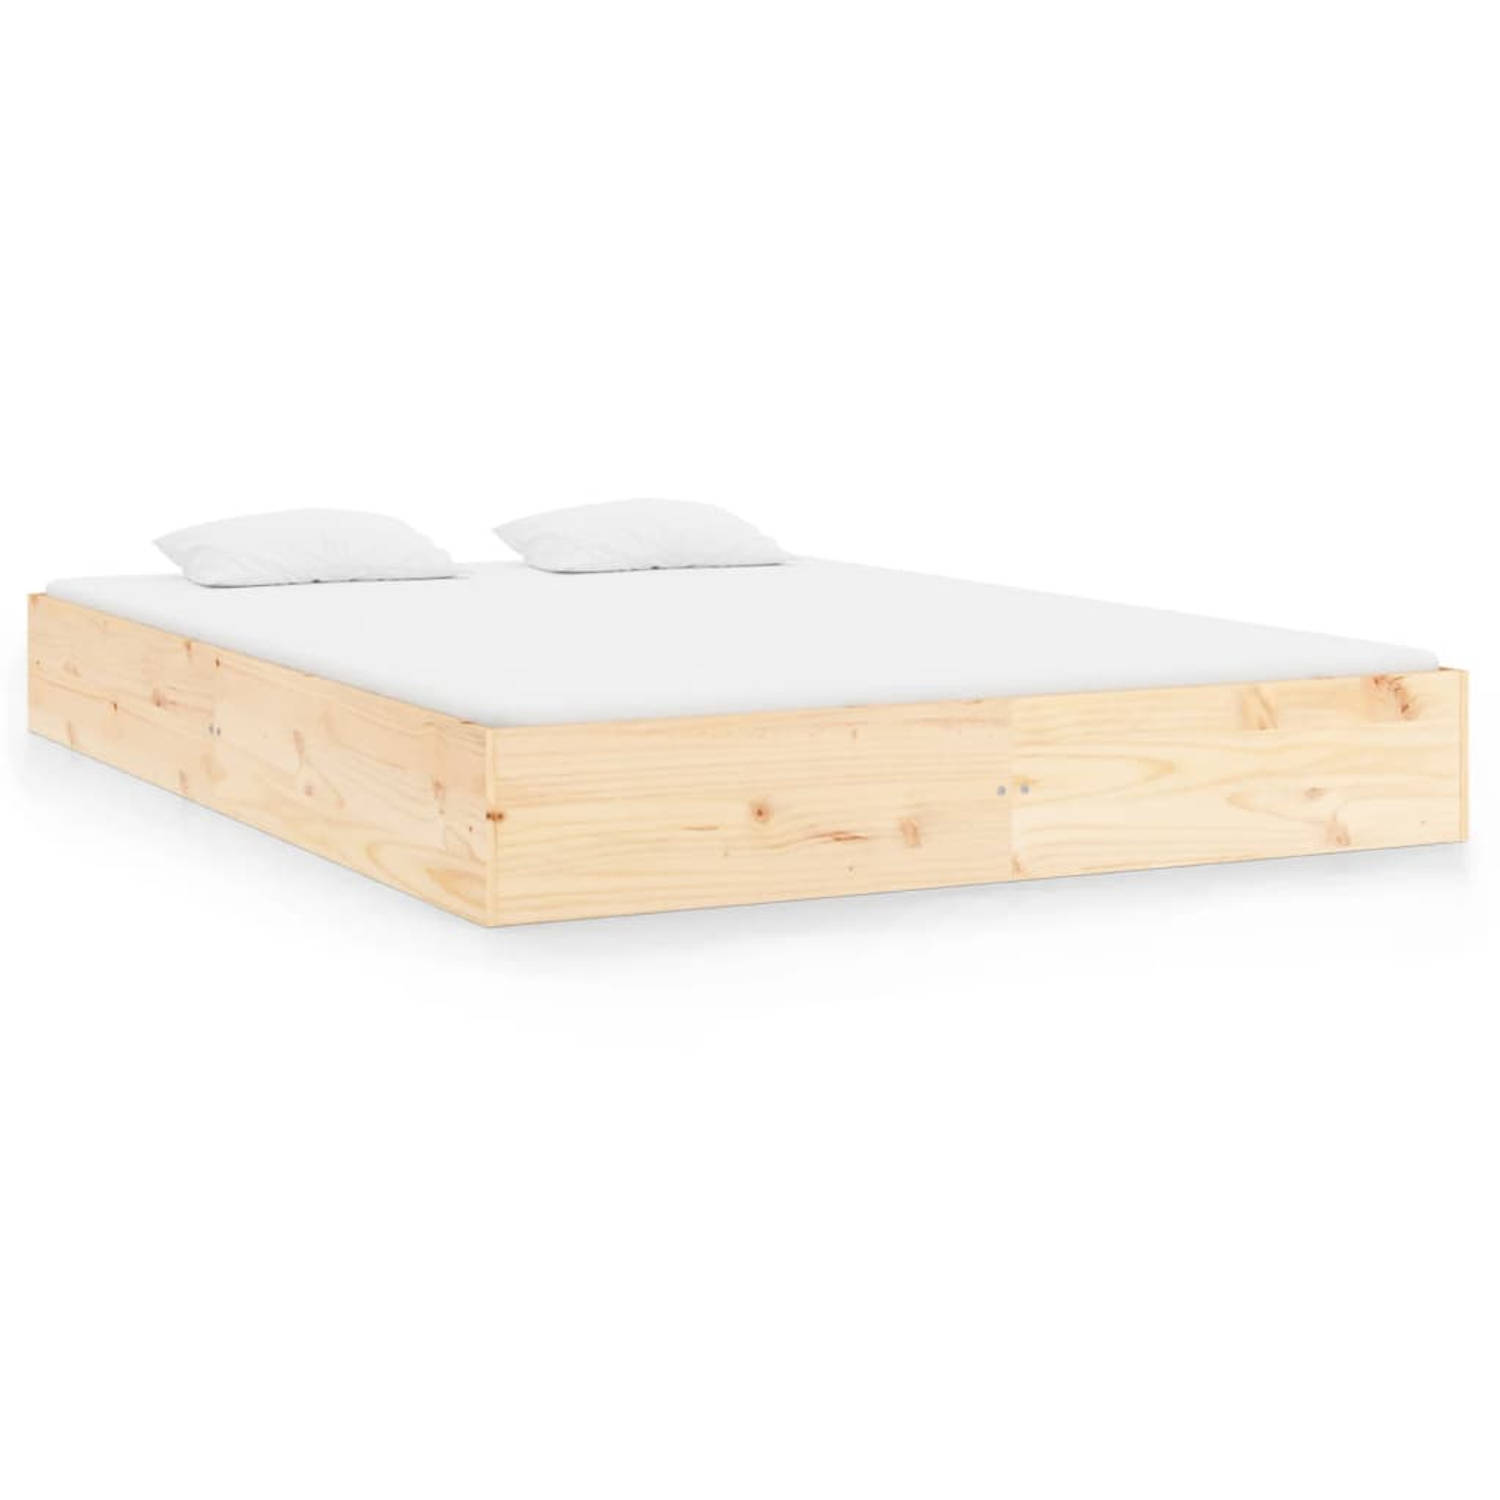 The Living Store Bedframe massief hout 150x200 cm 5FT King Size - Bedframe - Bedframes - Bed - Bedbodem - Ledikant - Bed Frame - Massief Houten Bedframe - Slaapmeubel - Tweepersoon